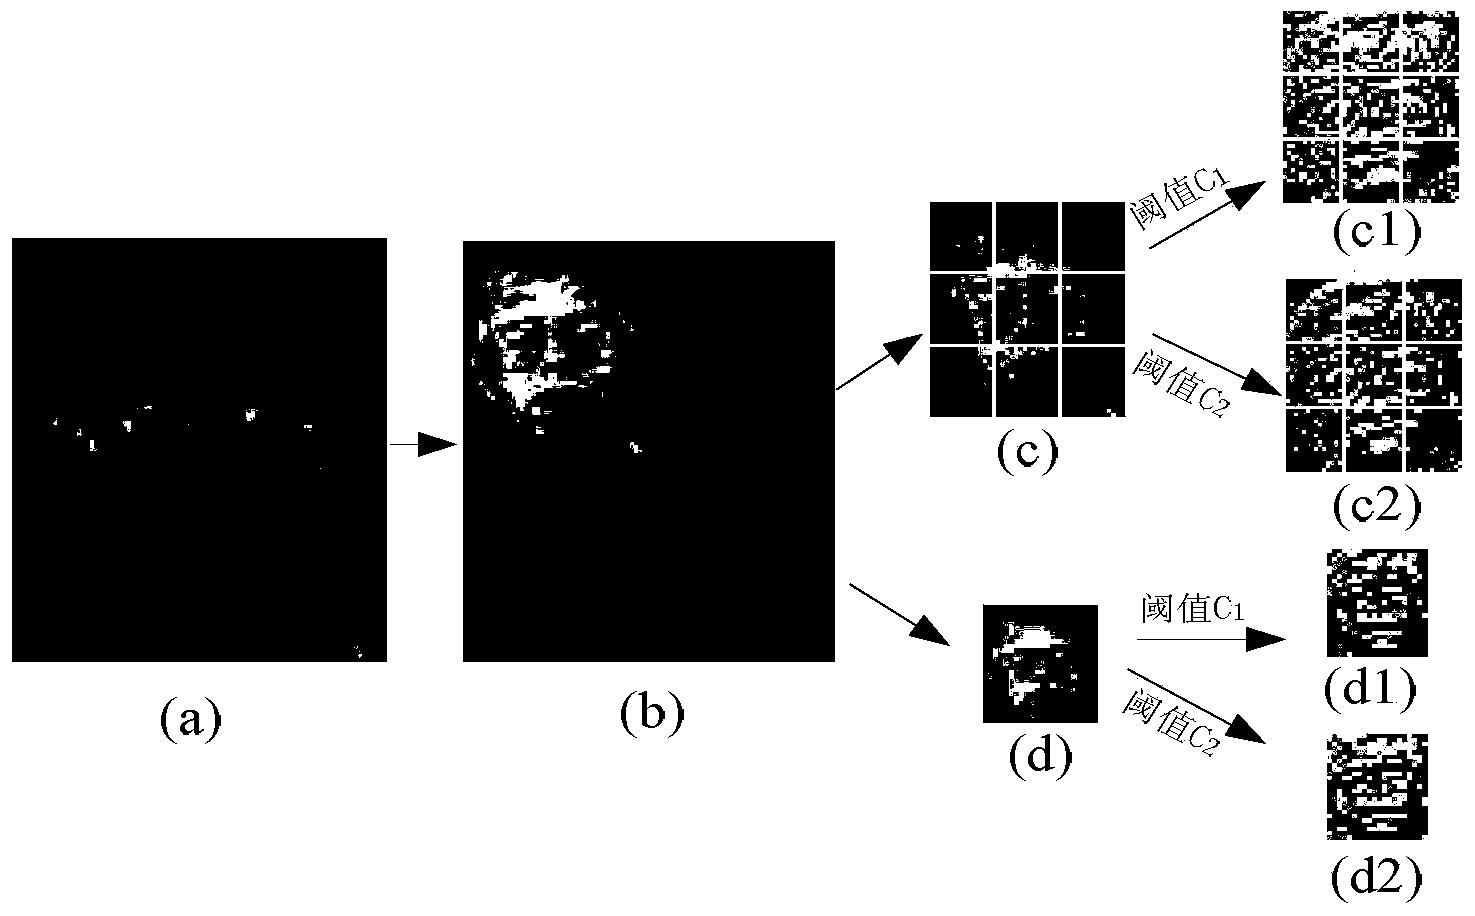 Face recognition method based on multi-resolution multi-threshold local binary pattern